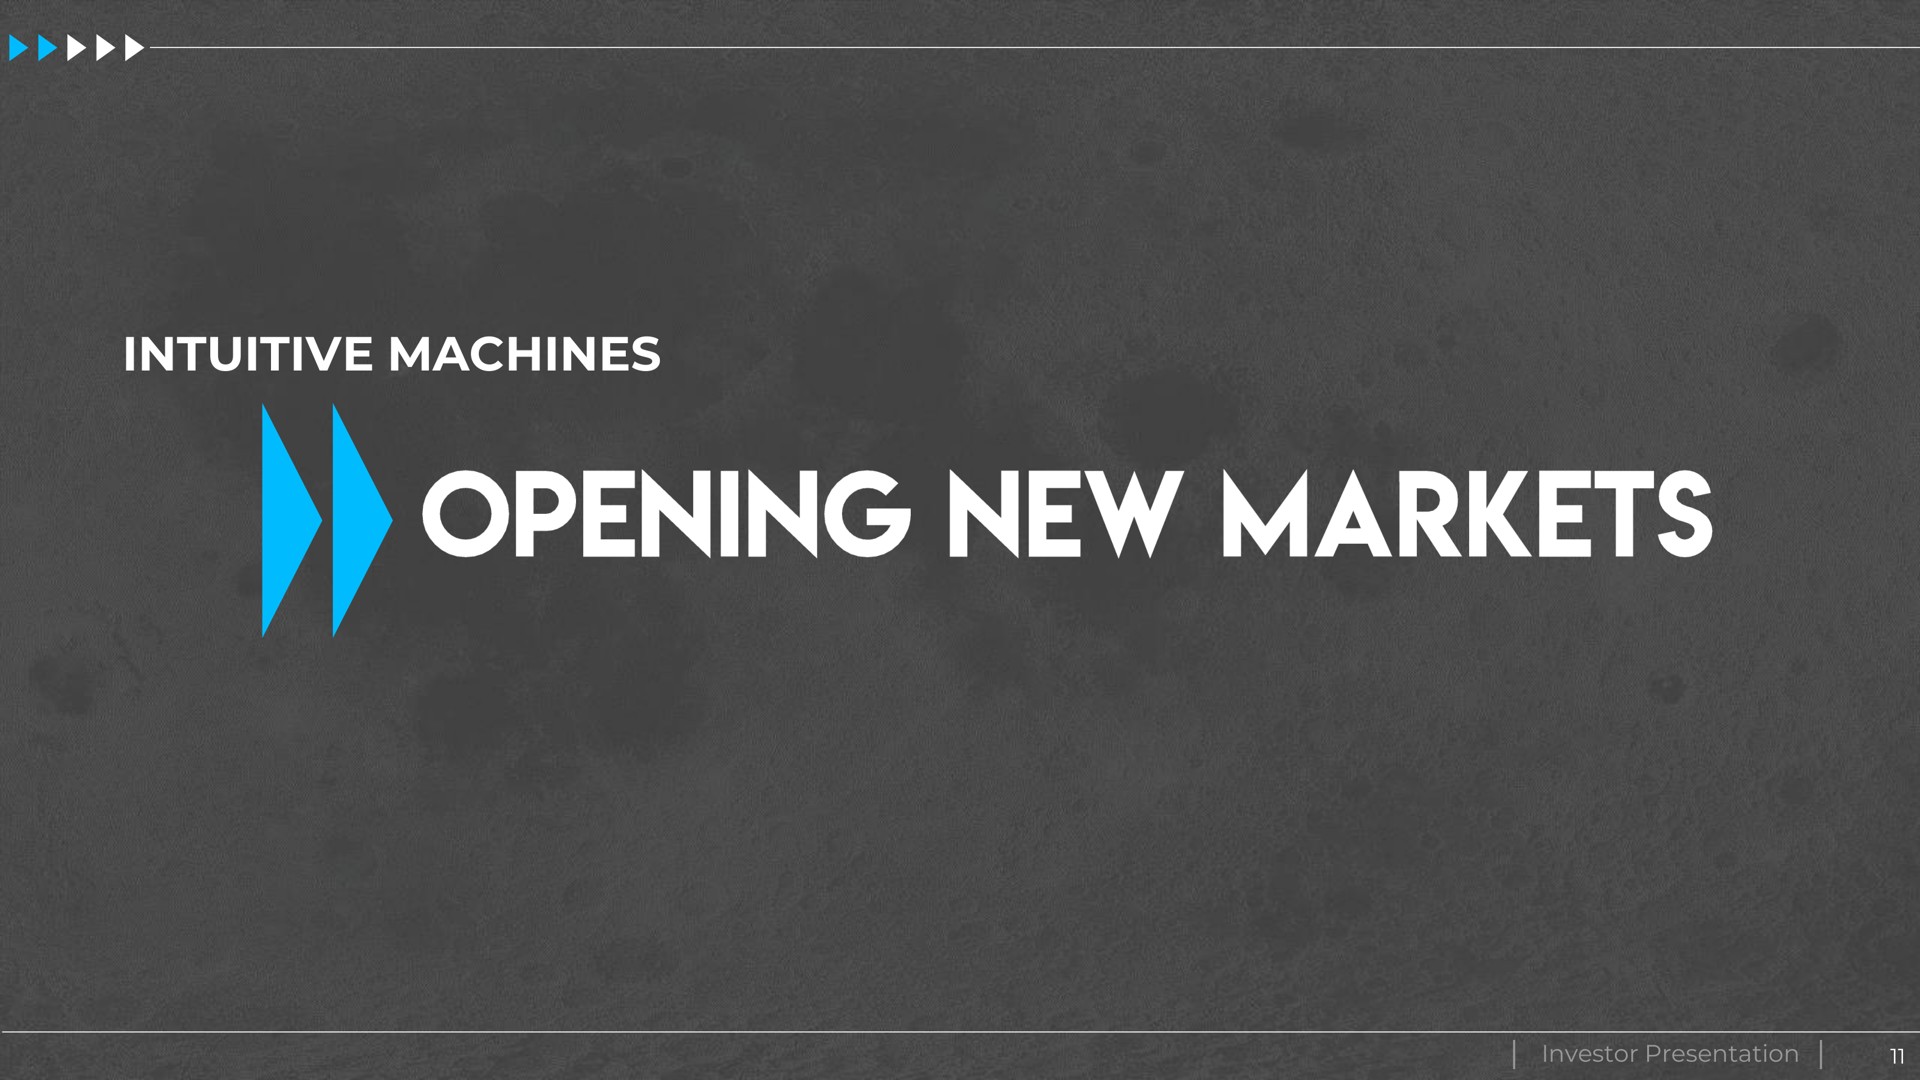 intuitive machines investor presentation opening new markets | Intuitive Machines